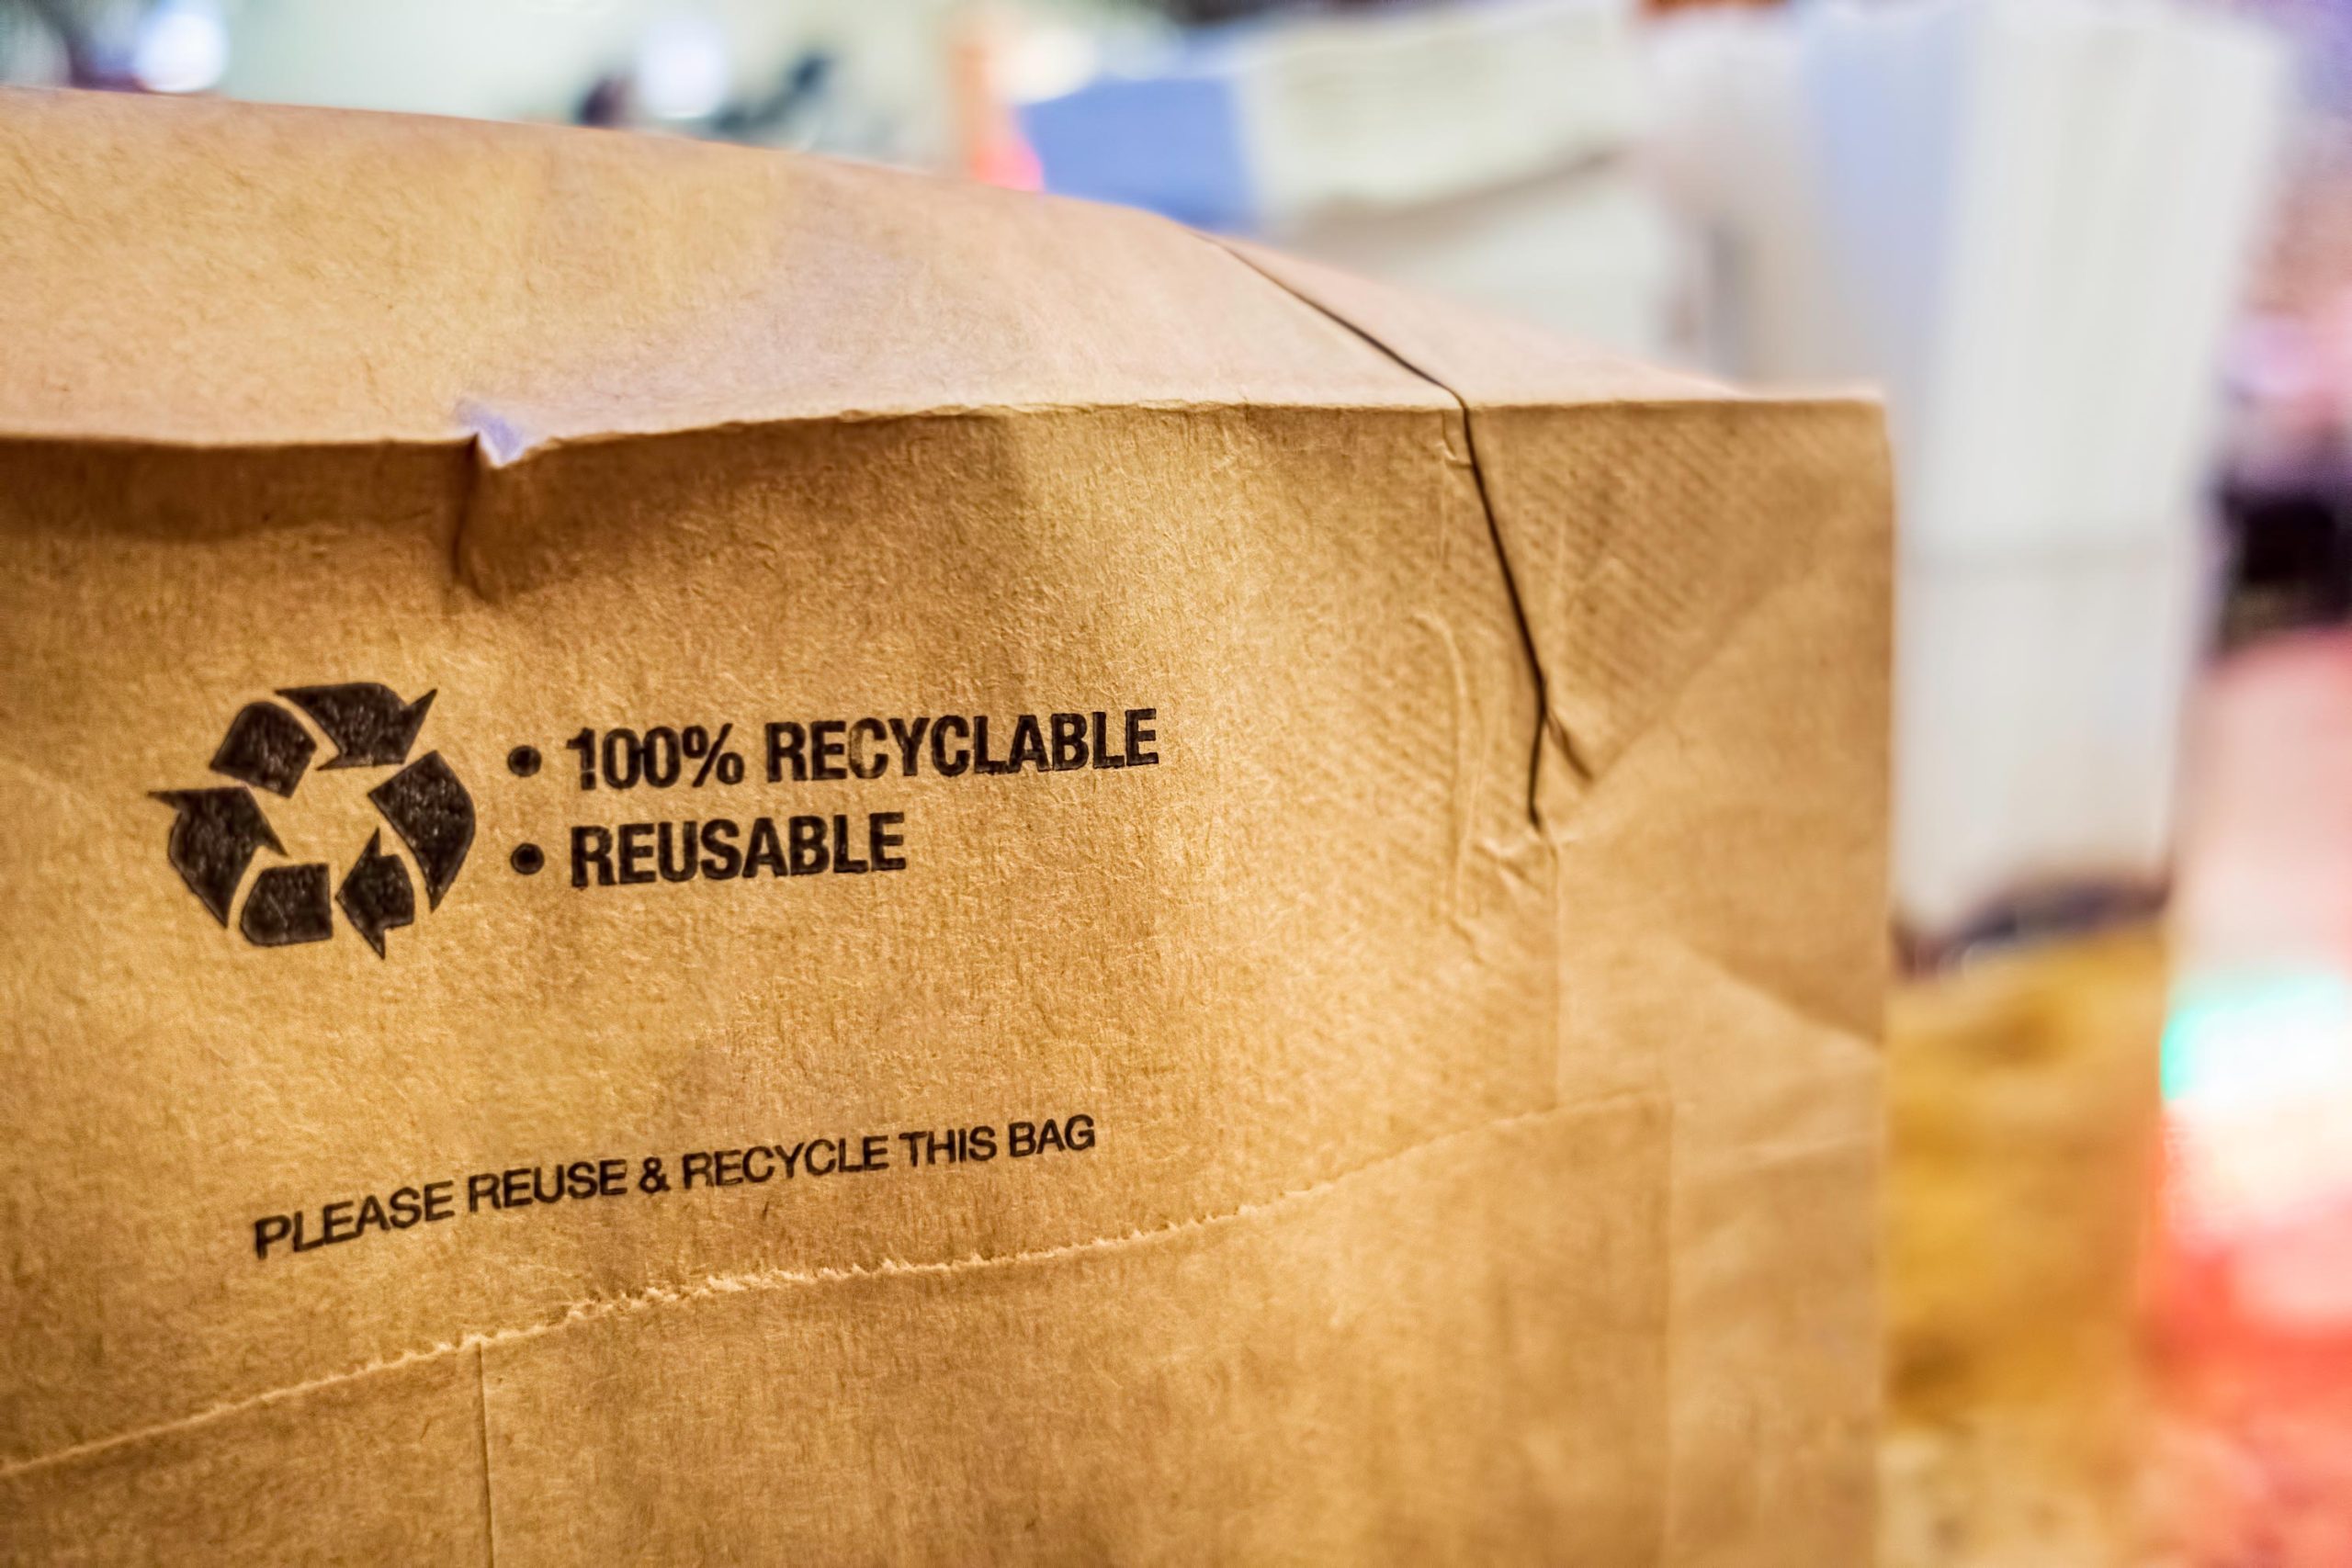 rown paper bag that is 100% recyclable and reusable